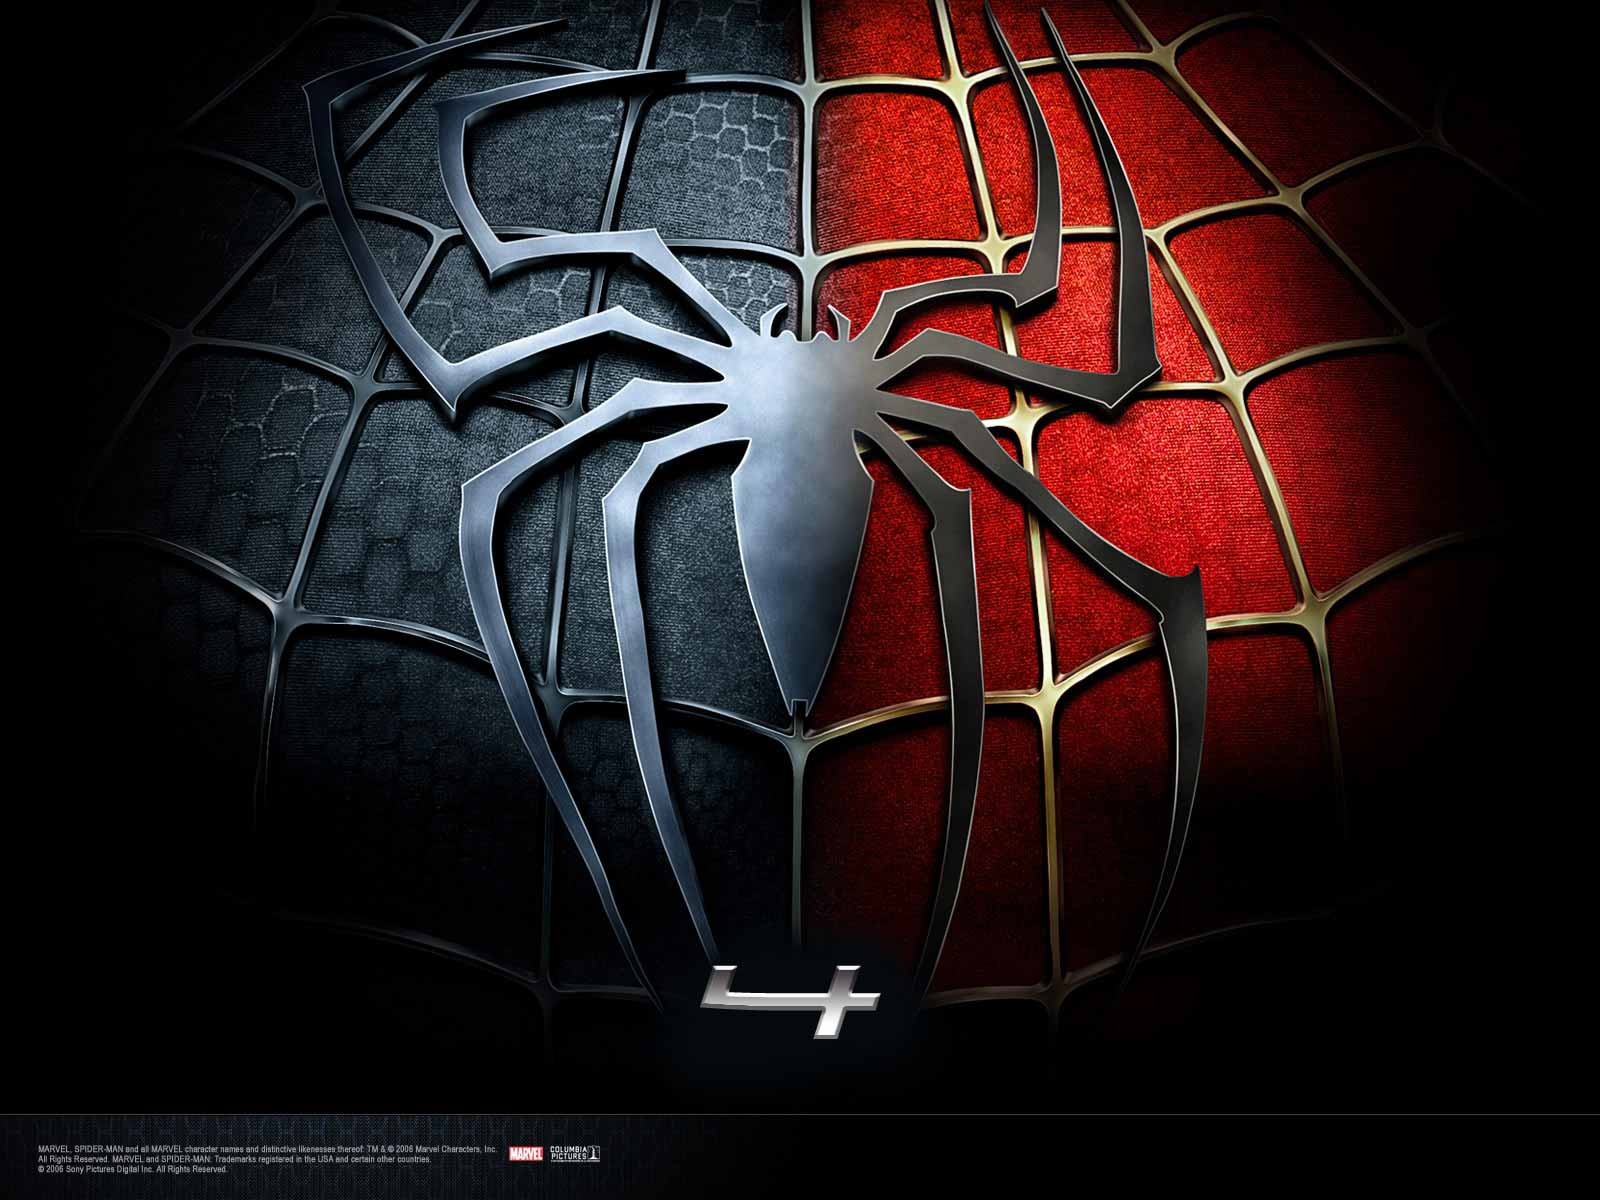 Spiderman pictures, spiderman wallpapers HD A5 - free full high definition 1920 x 1020 marvel Comics Superheroes desktop laptop mobile phone background wallpapers images downloads. Spiderman 1, Spiderman 2, Spiderman 3, Spiderman 4, Spiderman 5.